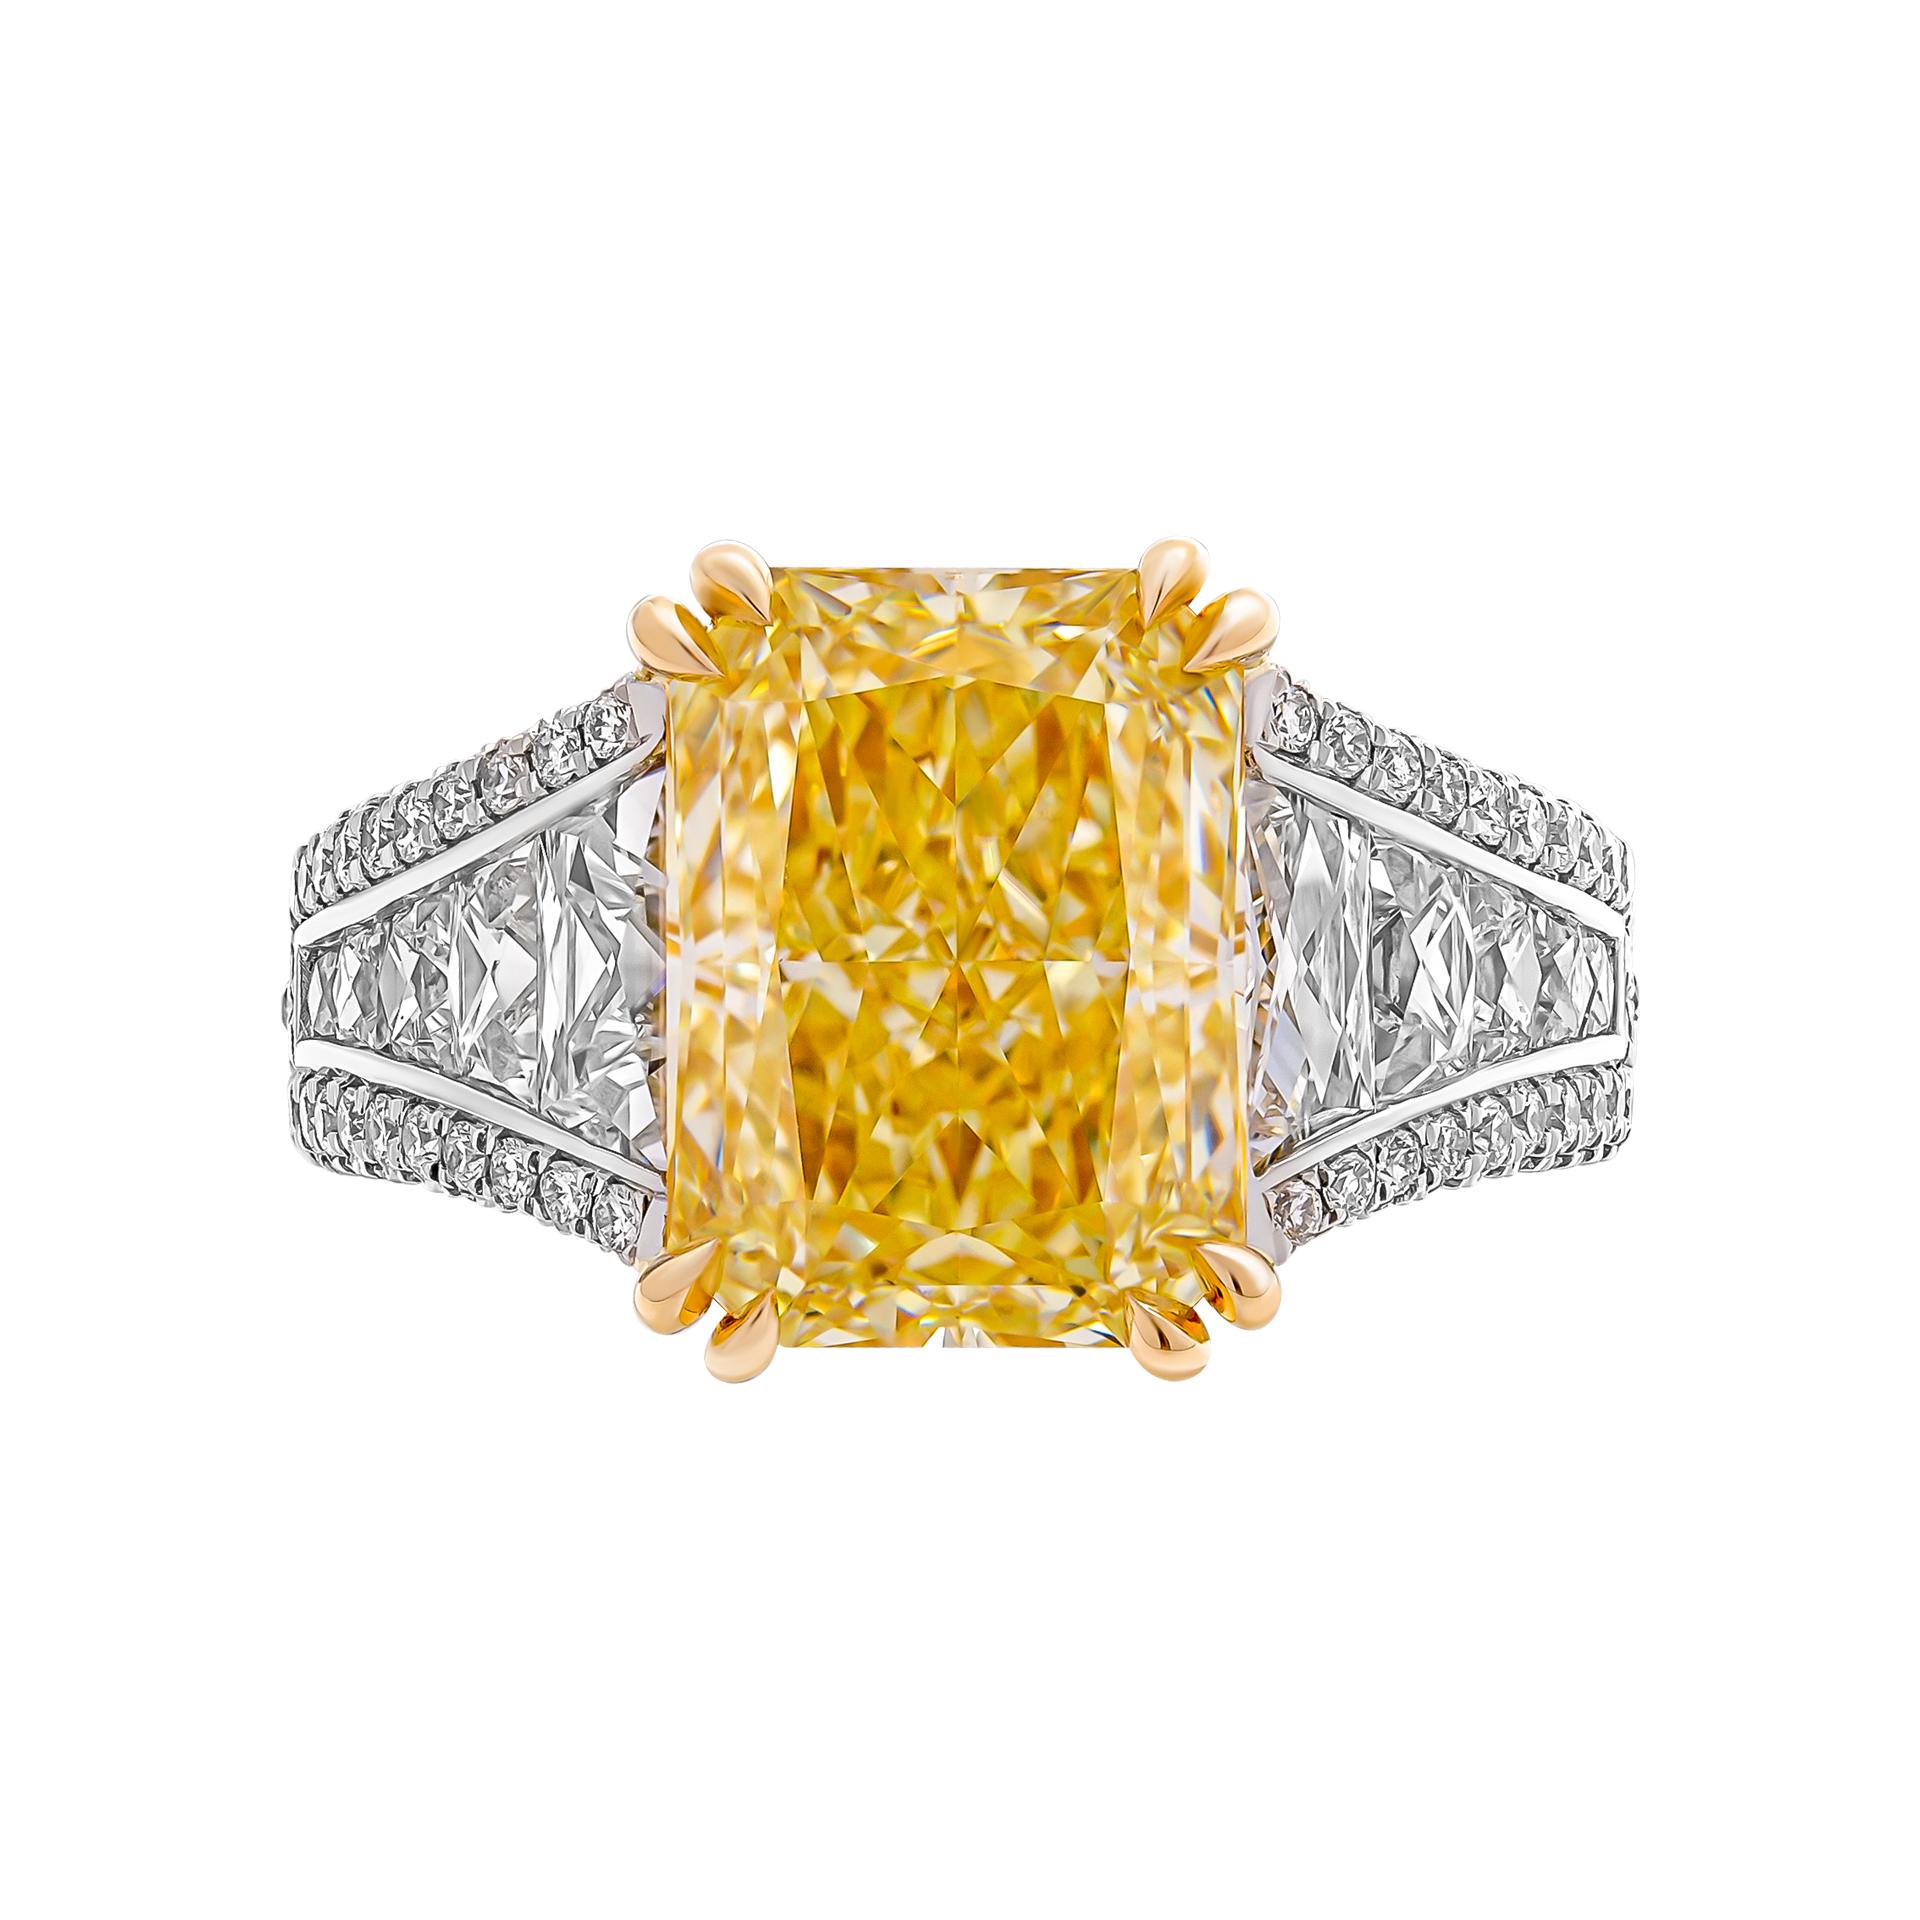 Cocktail ring in Platinum & 18K Yellow Gold 
Center: 5.43ct Fancy Light YellowVS2 Radiant Cut Diamond GIA#6224564207
10 Side stones totaling 1.01ct G-H color VS+ clarity French cut shape graduating
Total Carat Weight of yellow diamonds: 0.07ct
Total